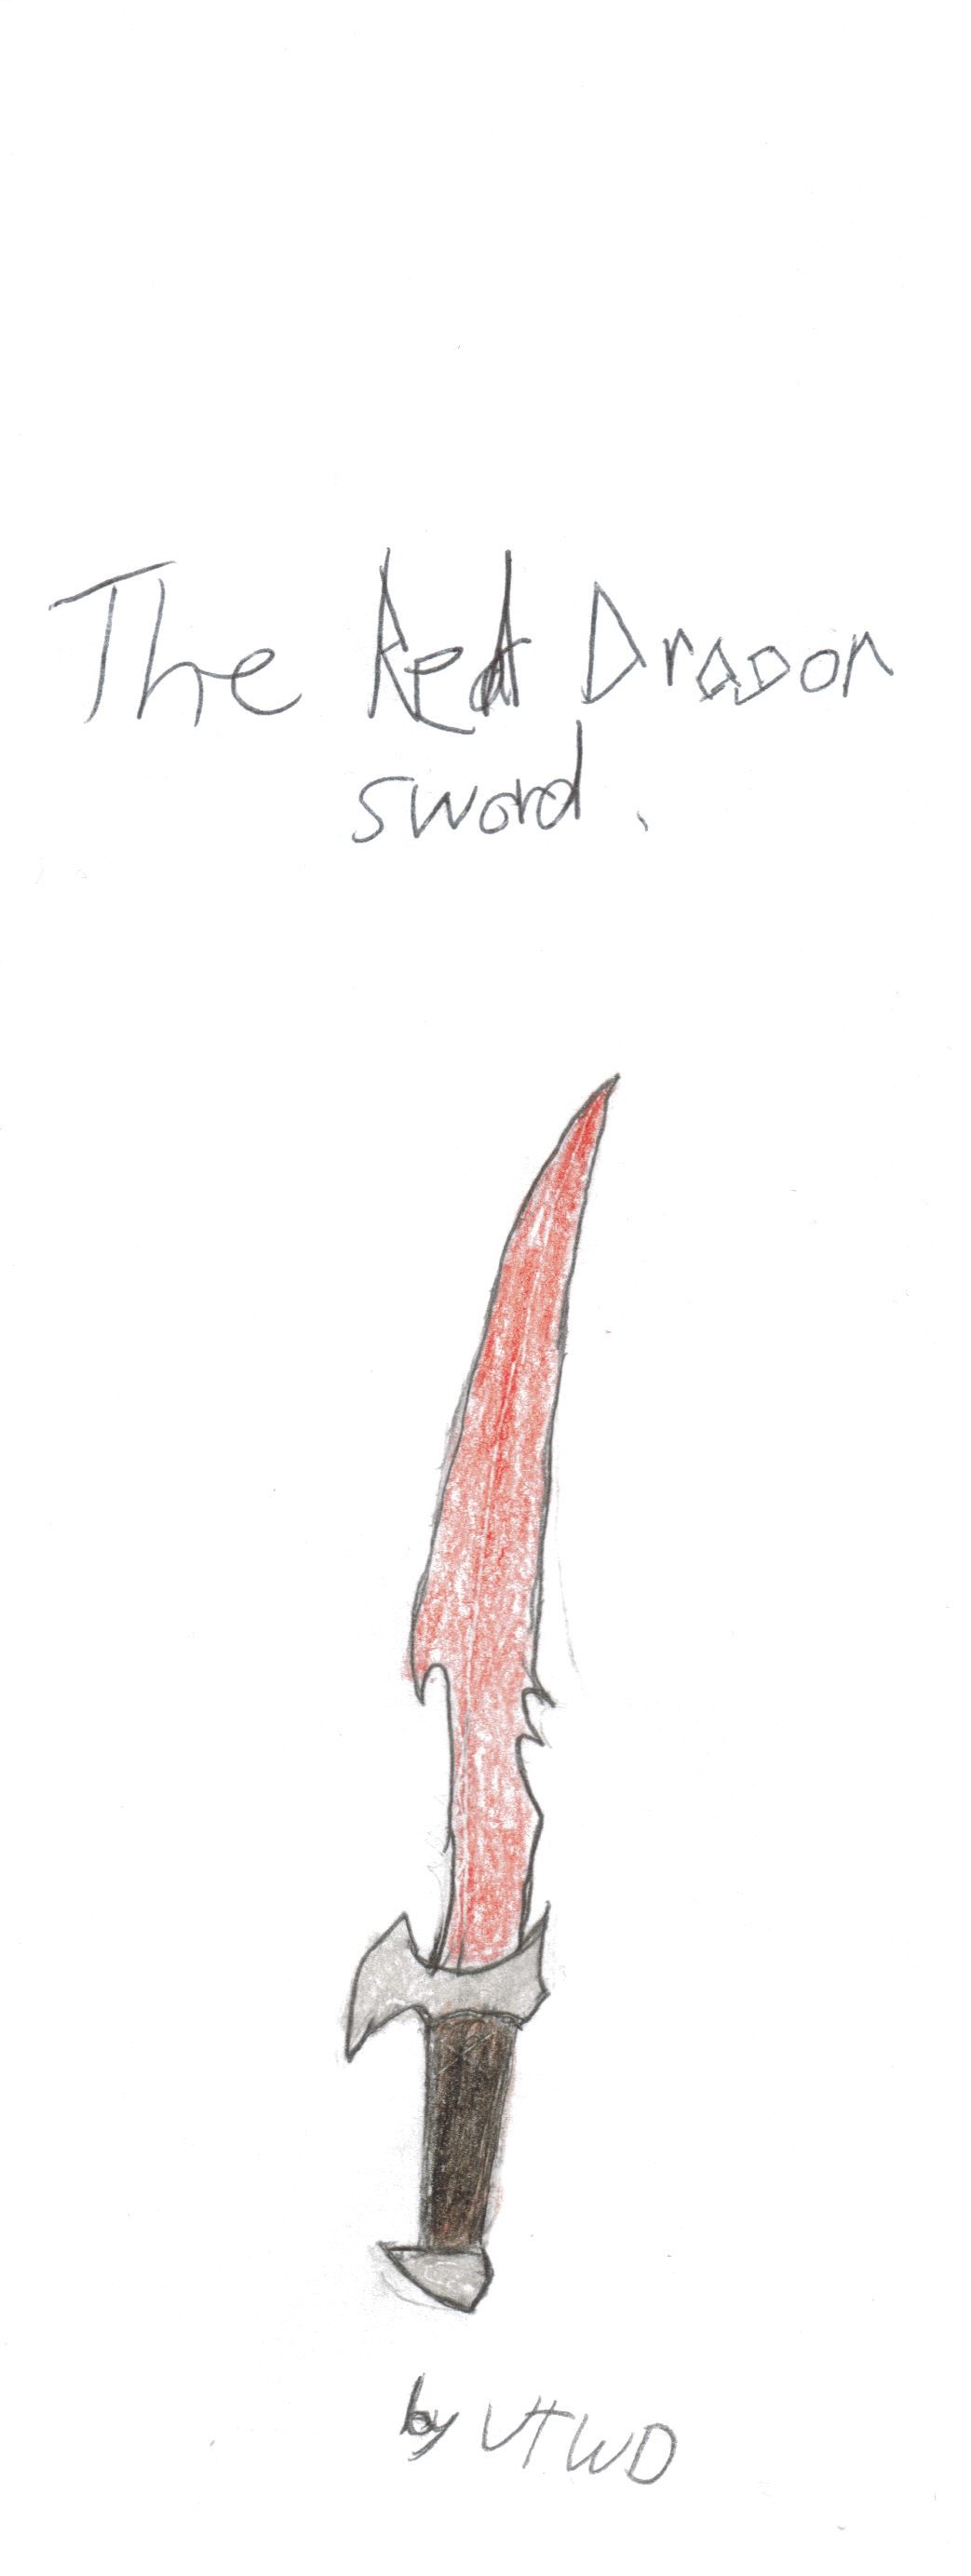 concept for sword of the red dragon by VahnTheWhiteDragon